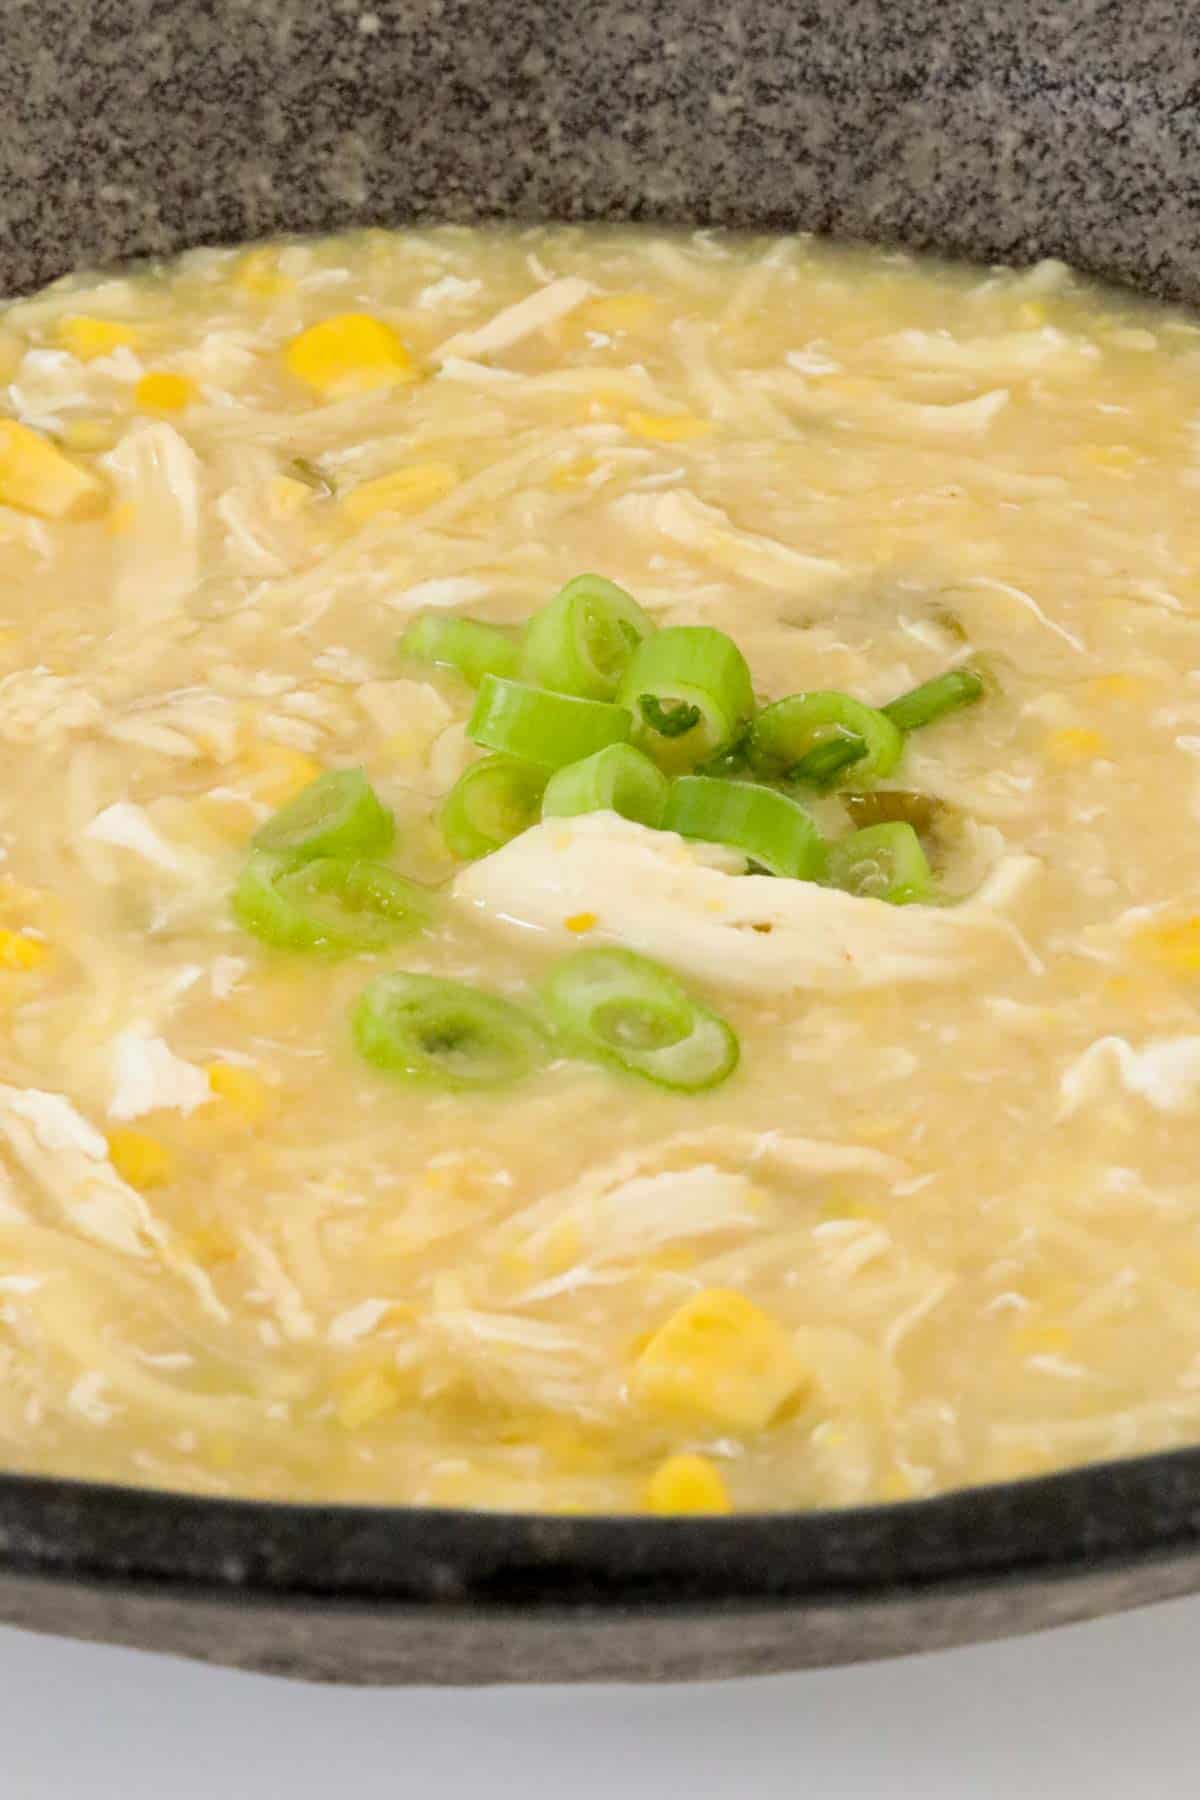 A close up of chicken, corn and noodle soup with spring onions sprinkled over the top.